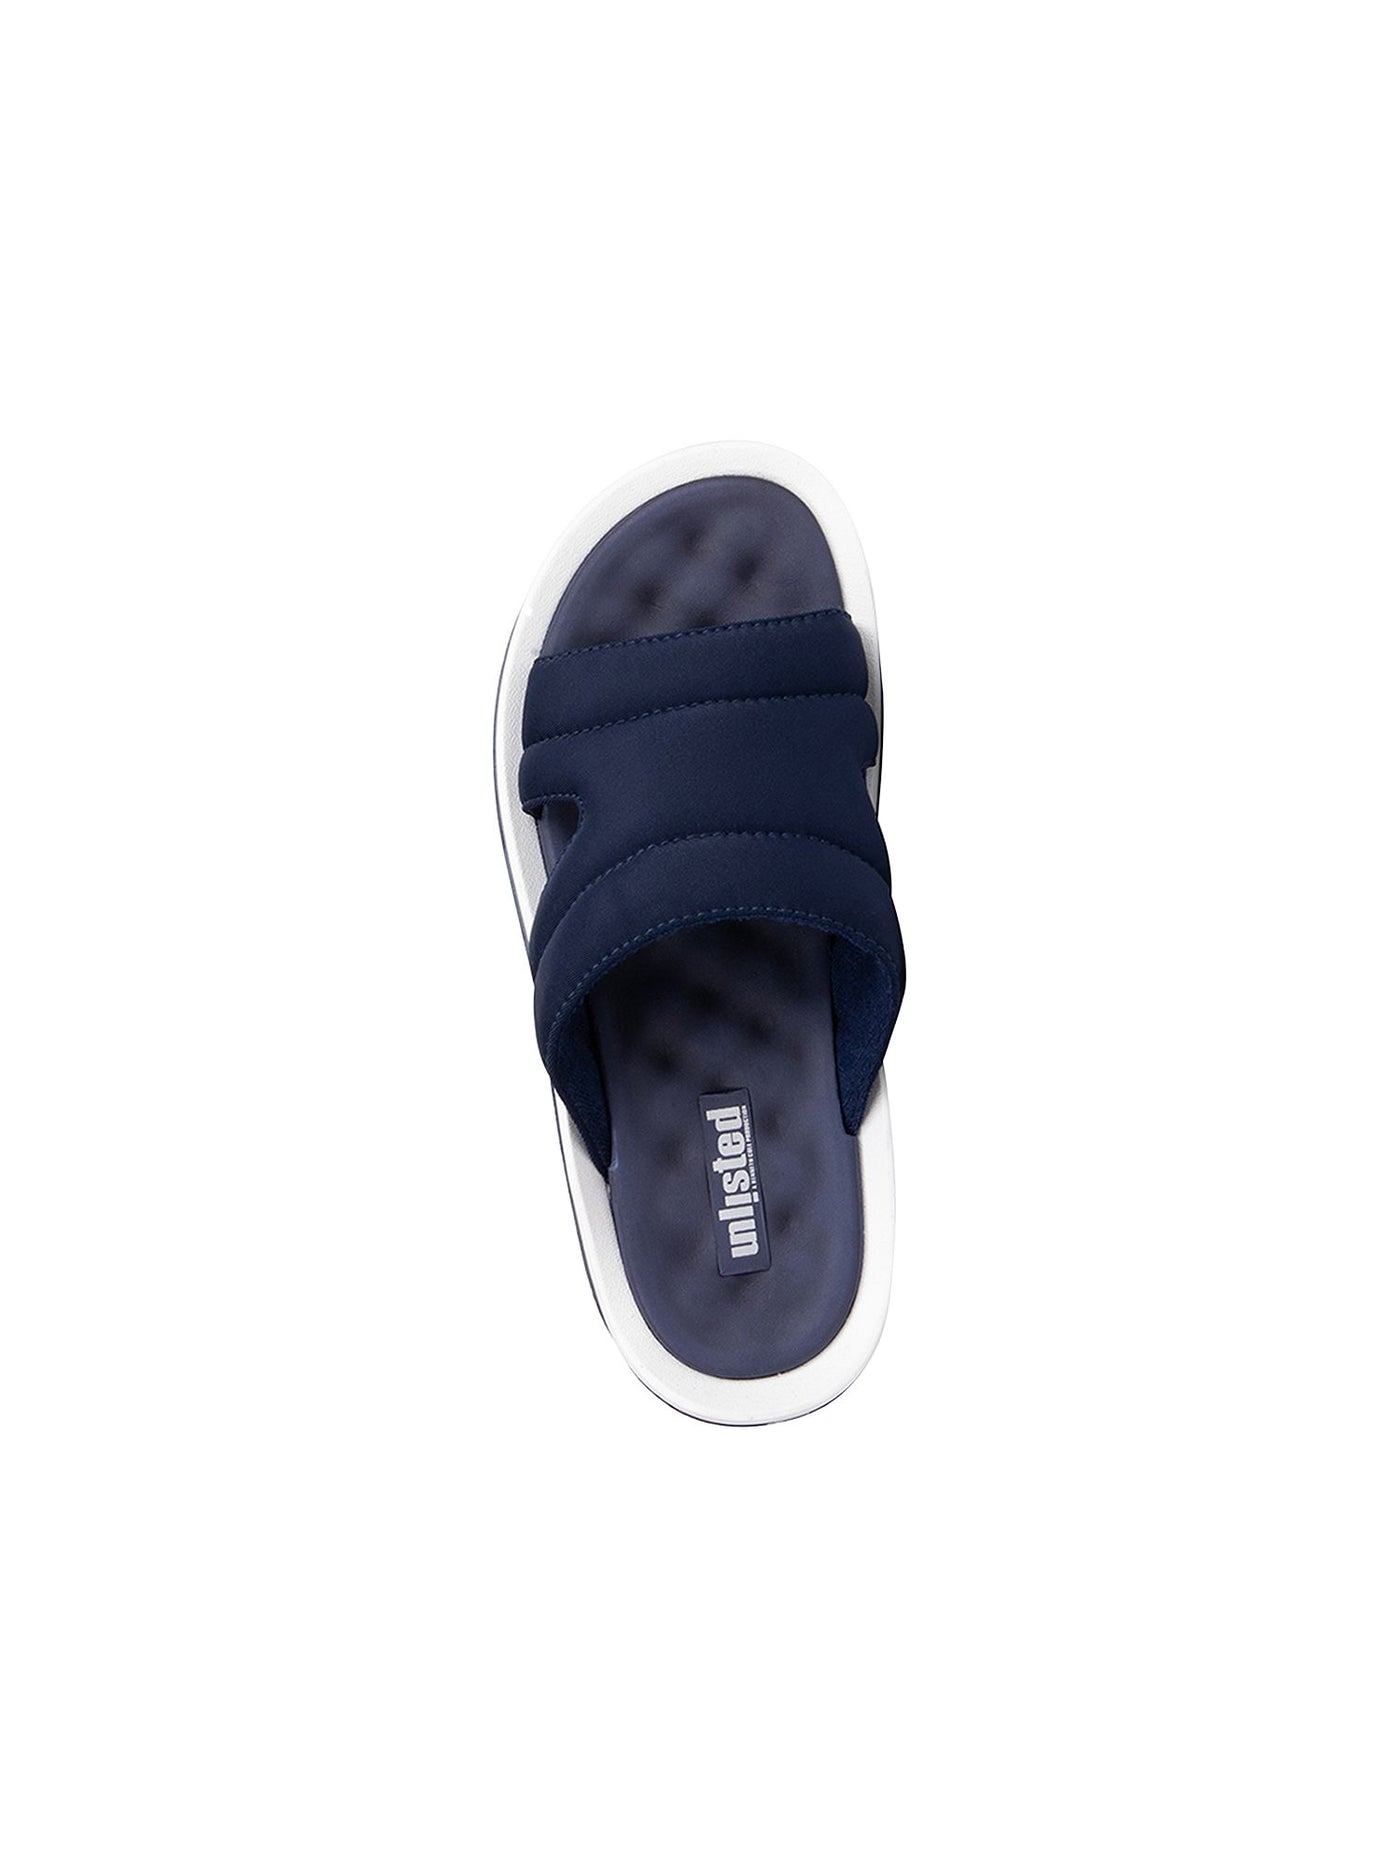 UNLISTED by KENNETH COLE Mens Navy Cut Out Quilted Quinn Round Toe Slip On Slide Sandals Shoes 13 M